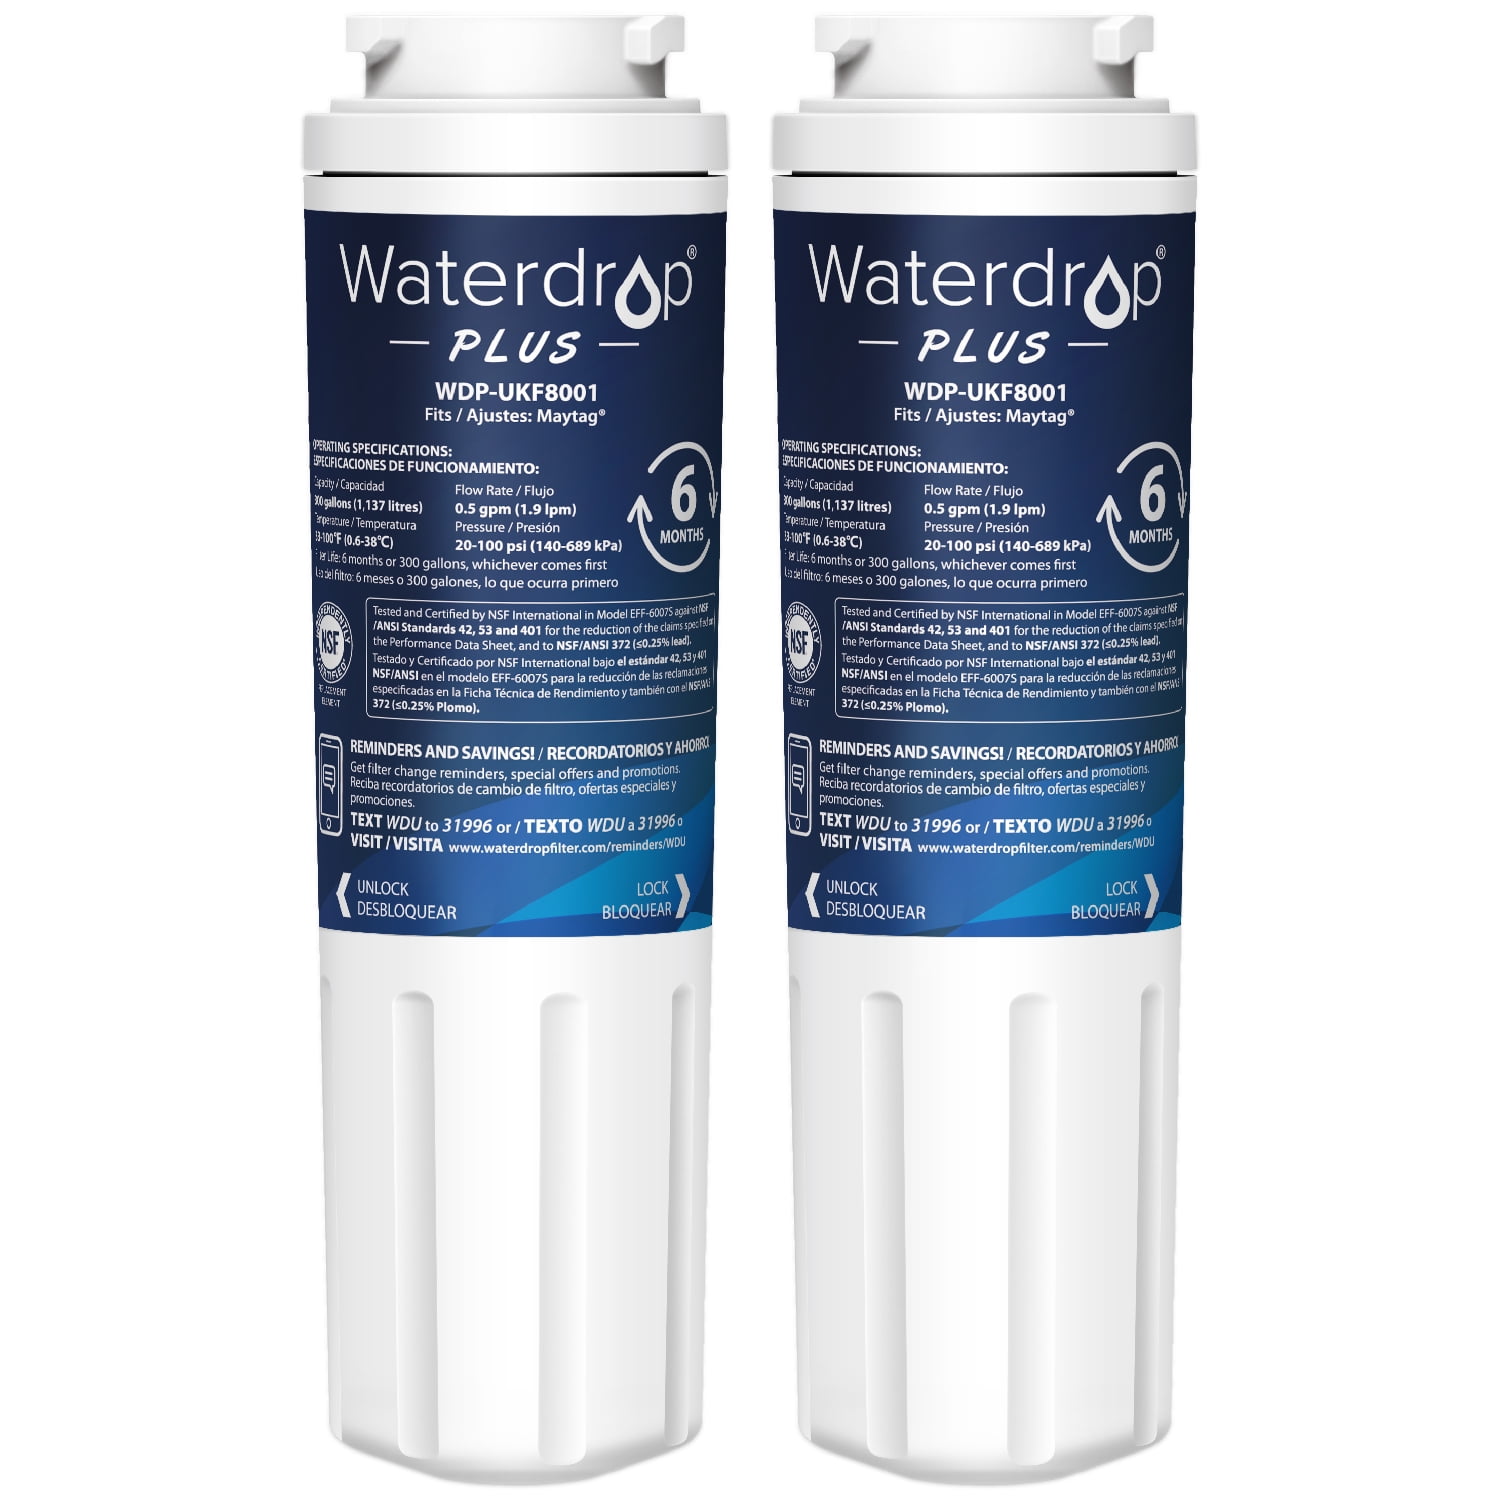 Waterdrop Plus UKF8001 NSF 401, 53&42 Certified Refrigerator Water Filter,  Compatible with Whirlpool Everydrop Filter 4, EDR4RXD1, Maytag UKF8001AXX,  4396395, Puriclean II, FMM-2 , 2 Filters 